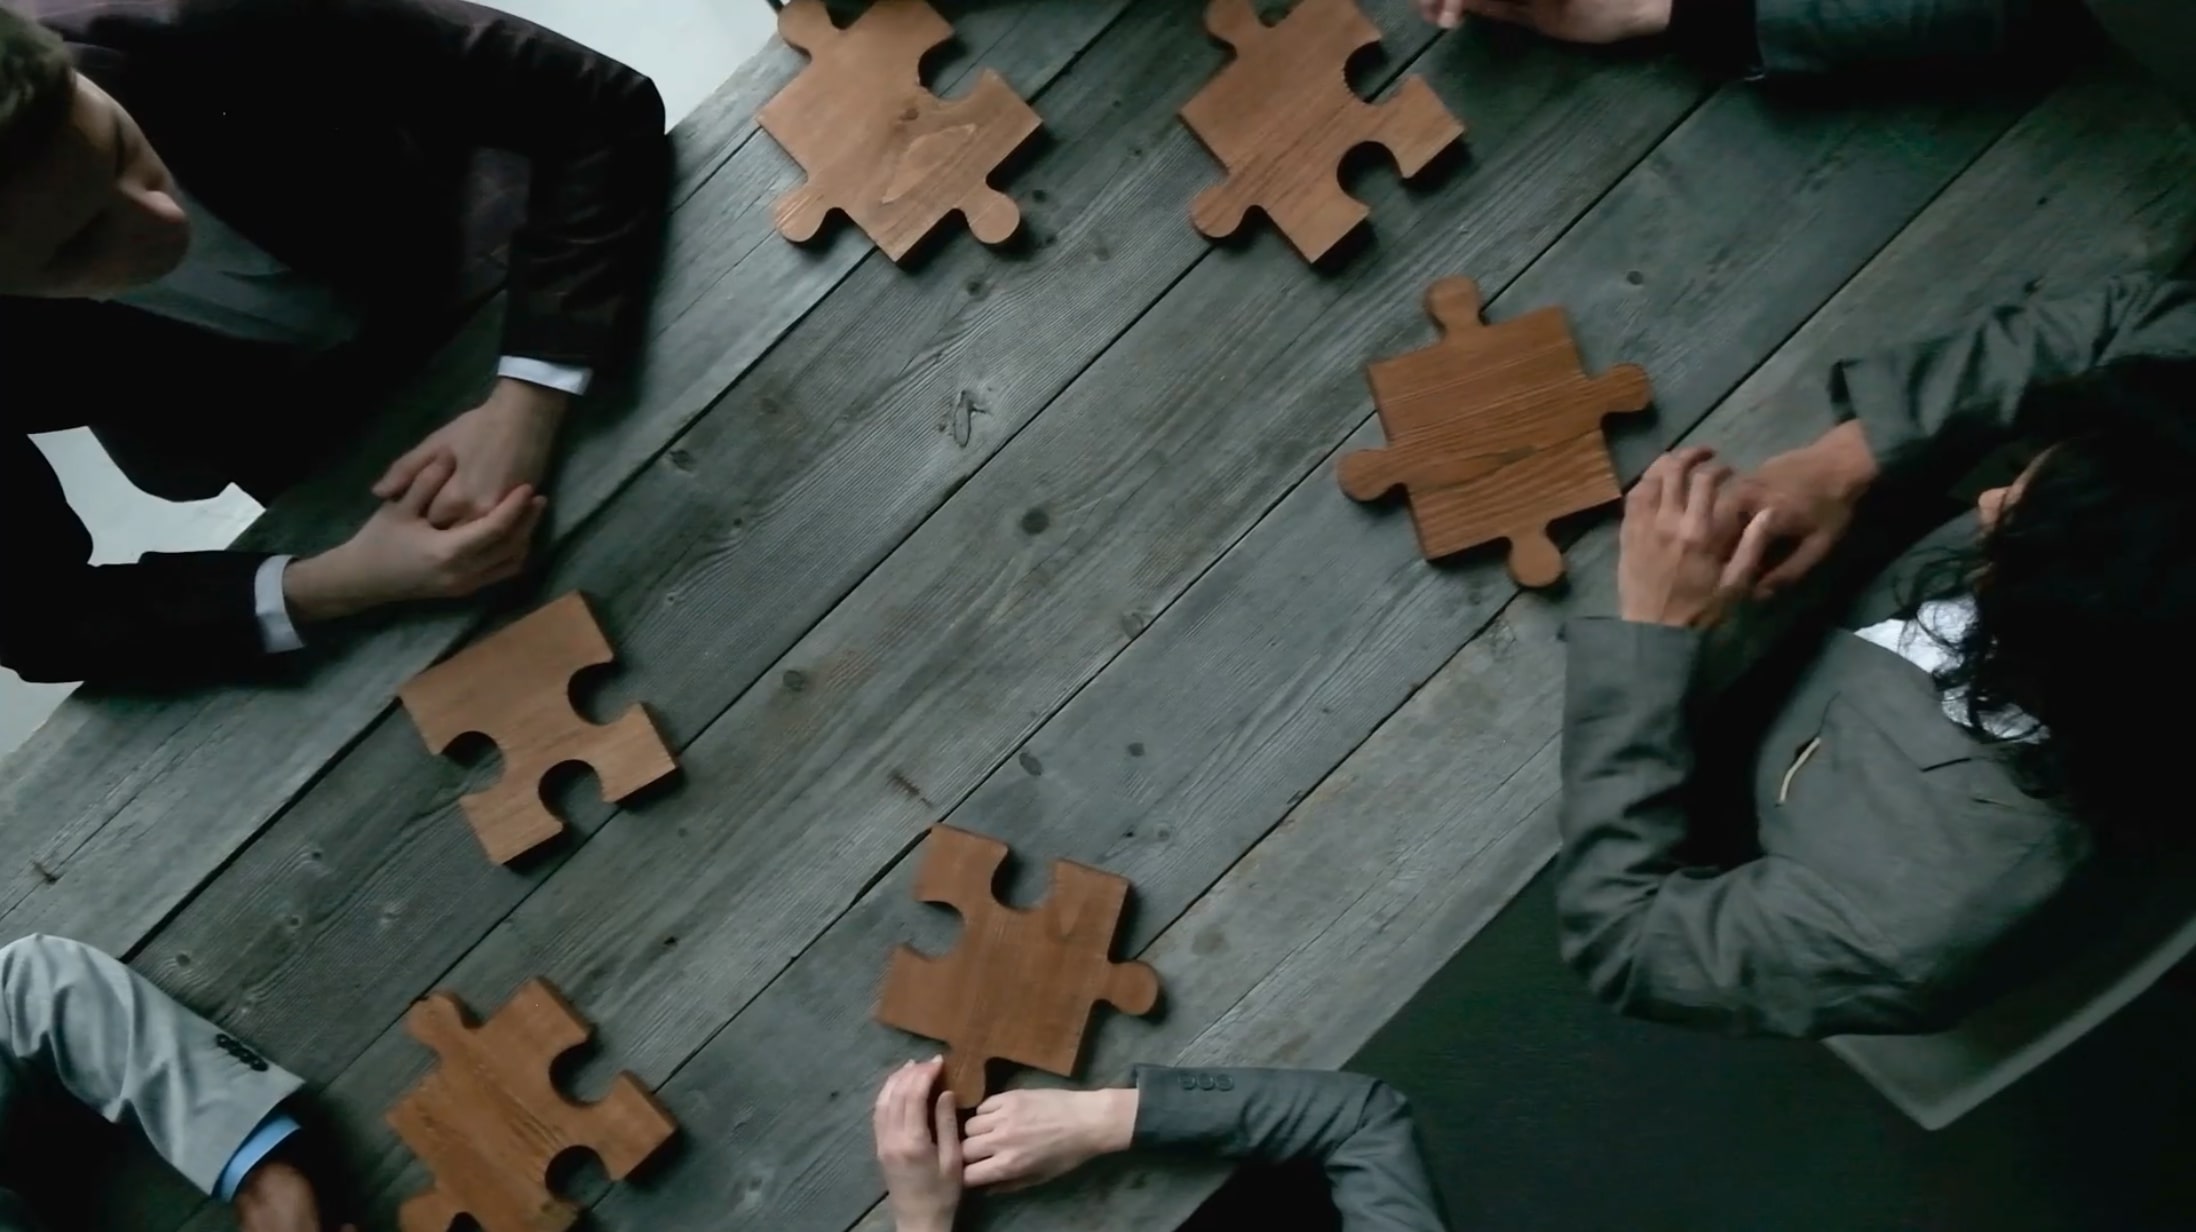 People sitting a table with puzzle pieces